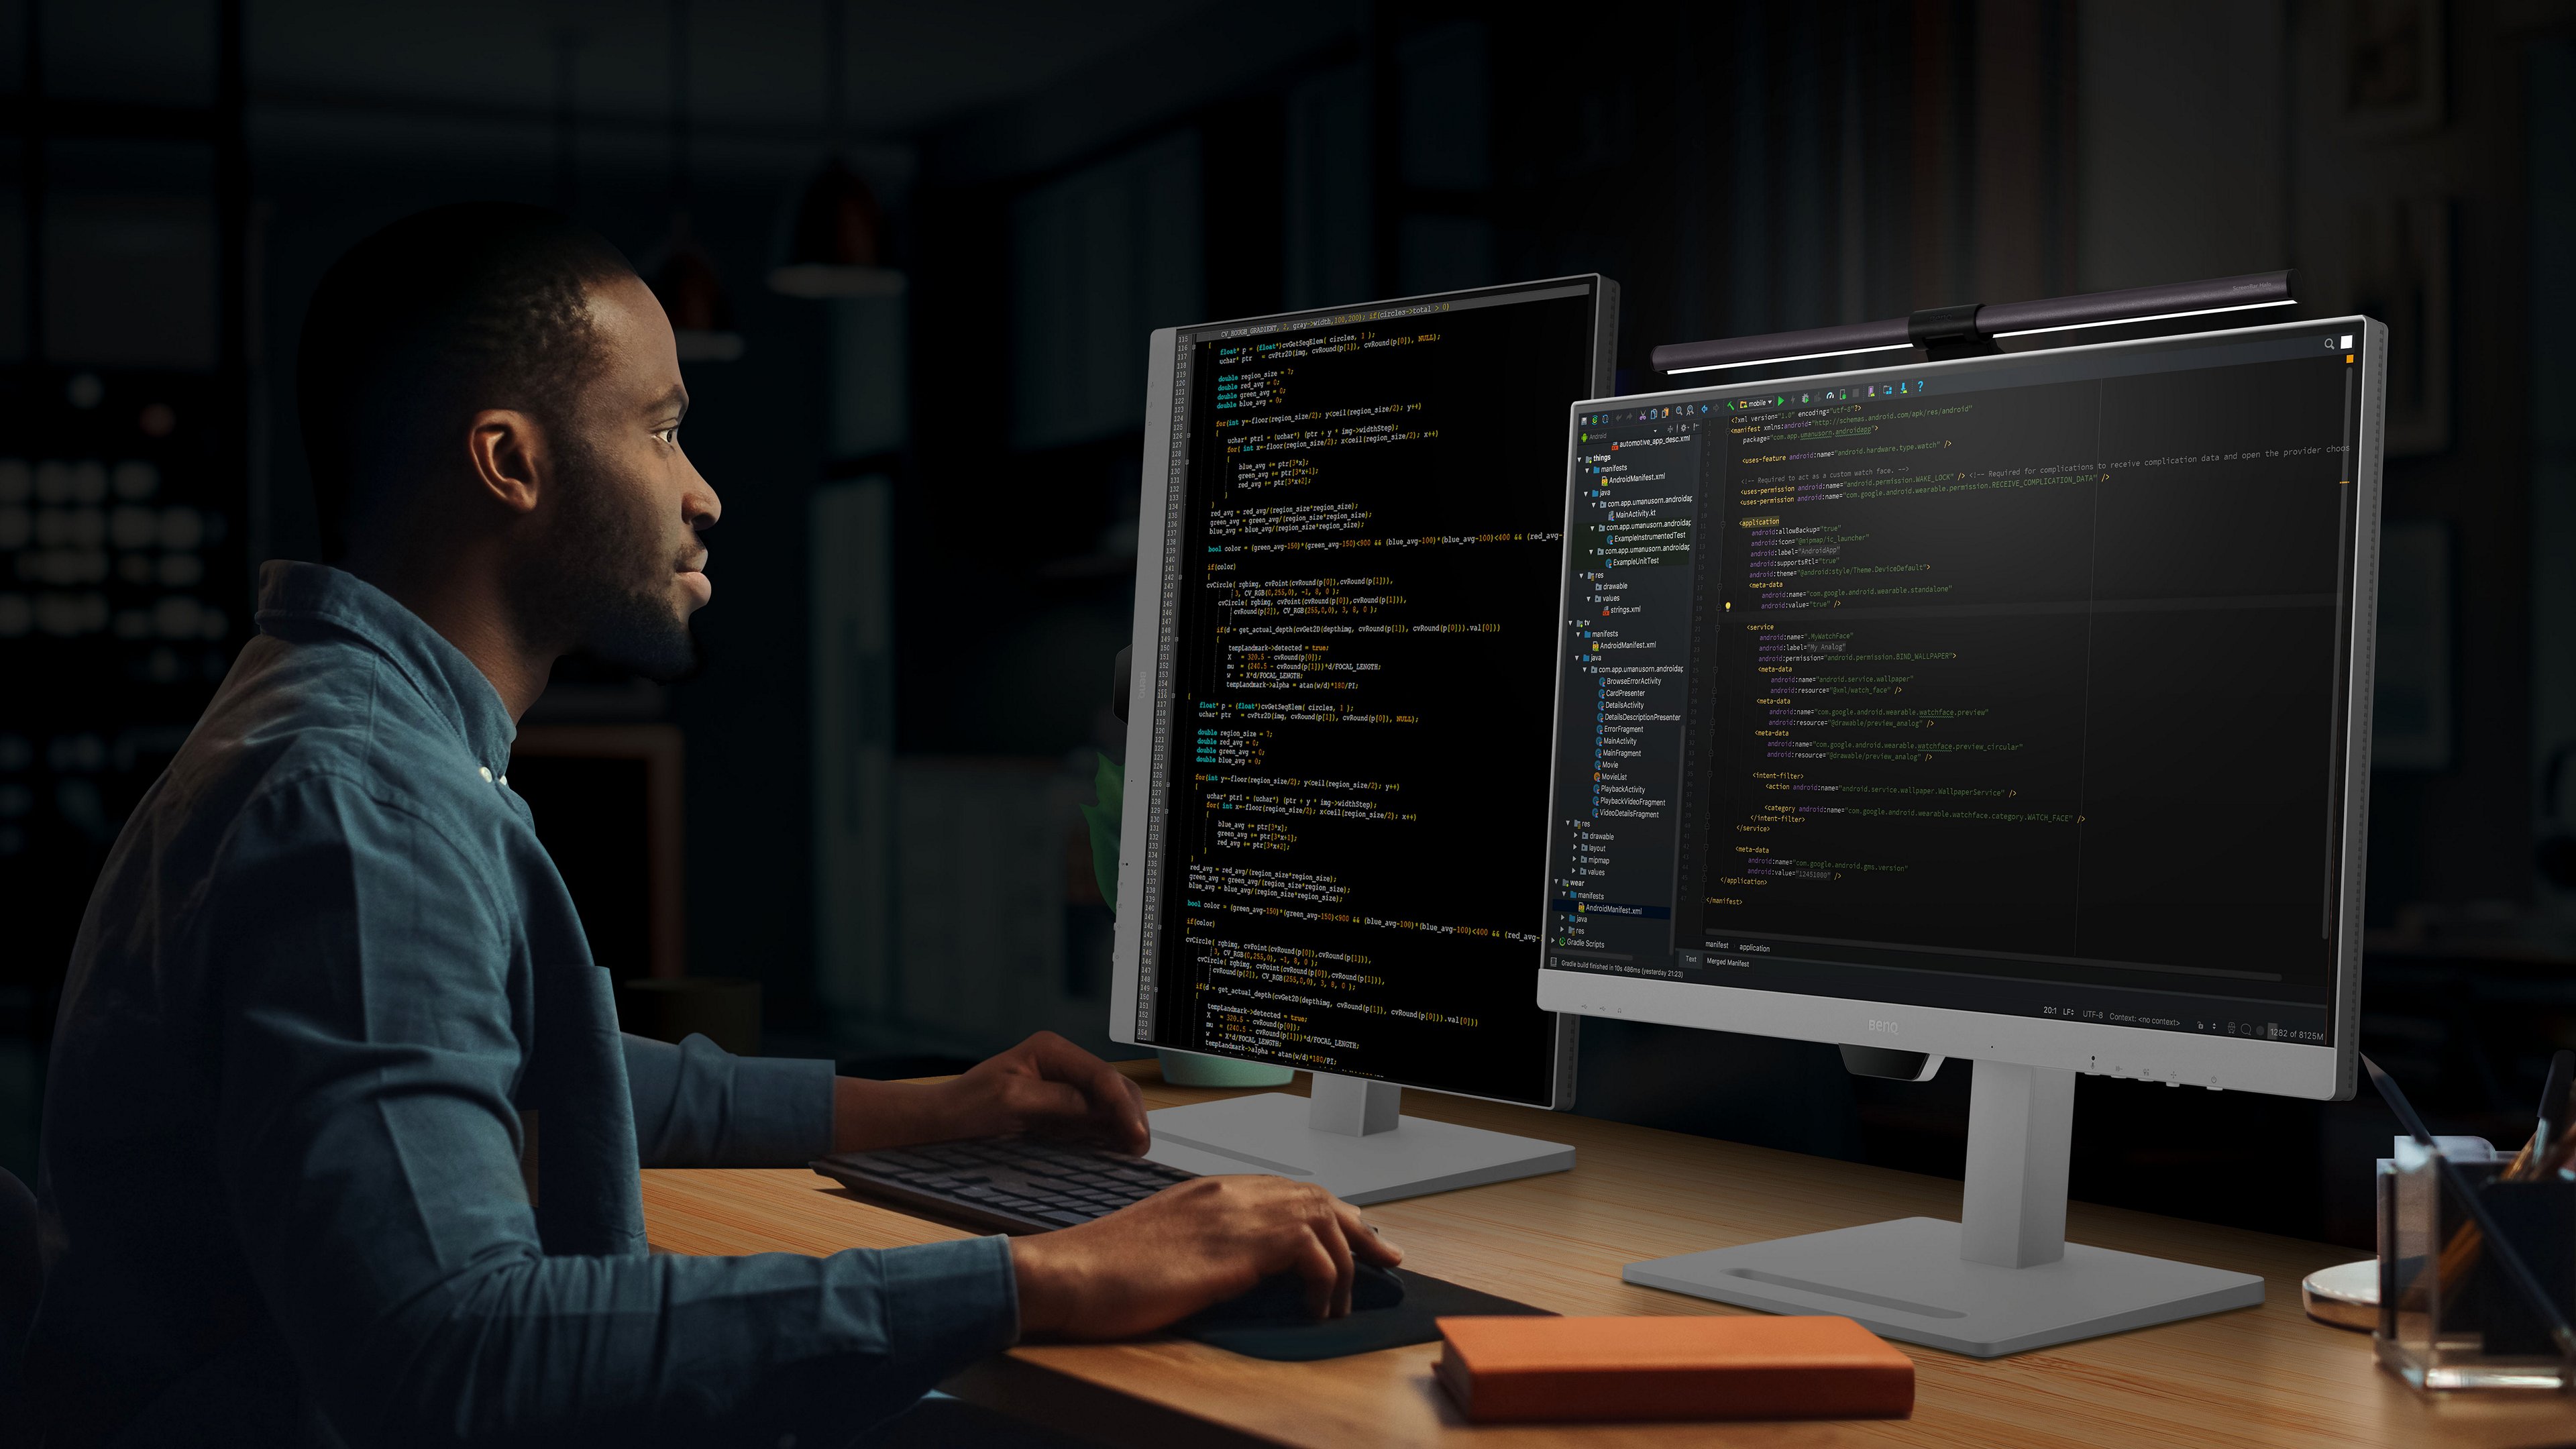 BenQ programming monitors let you coding in the dark with eye-care